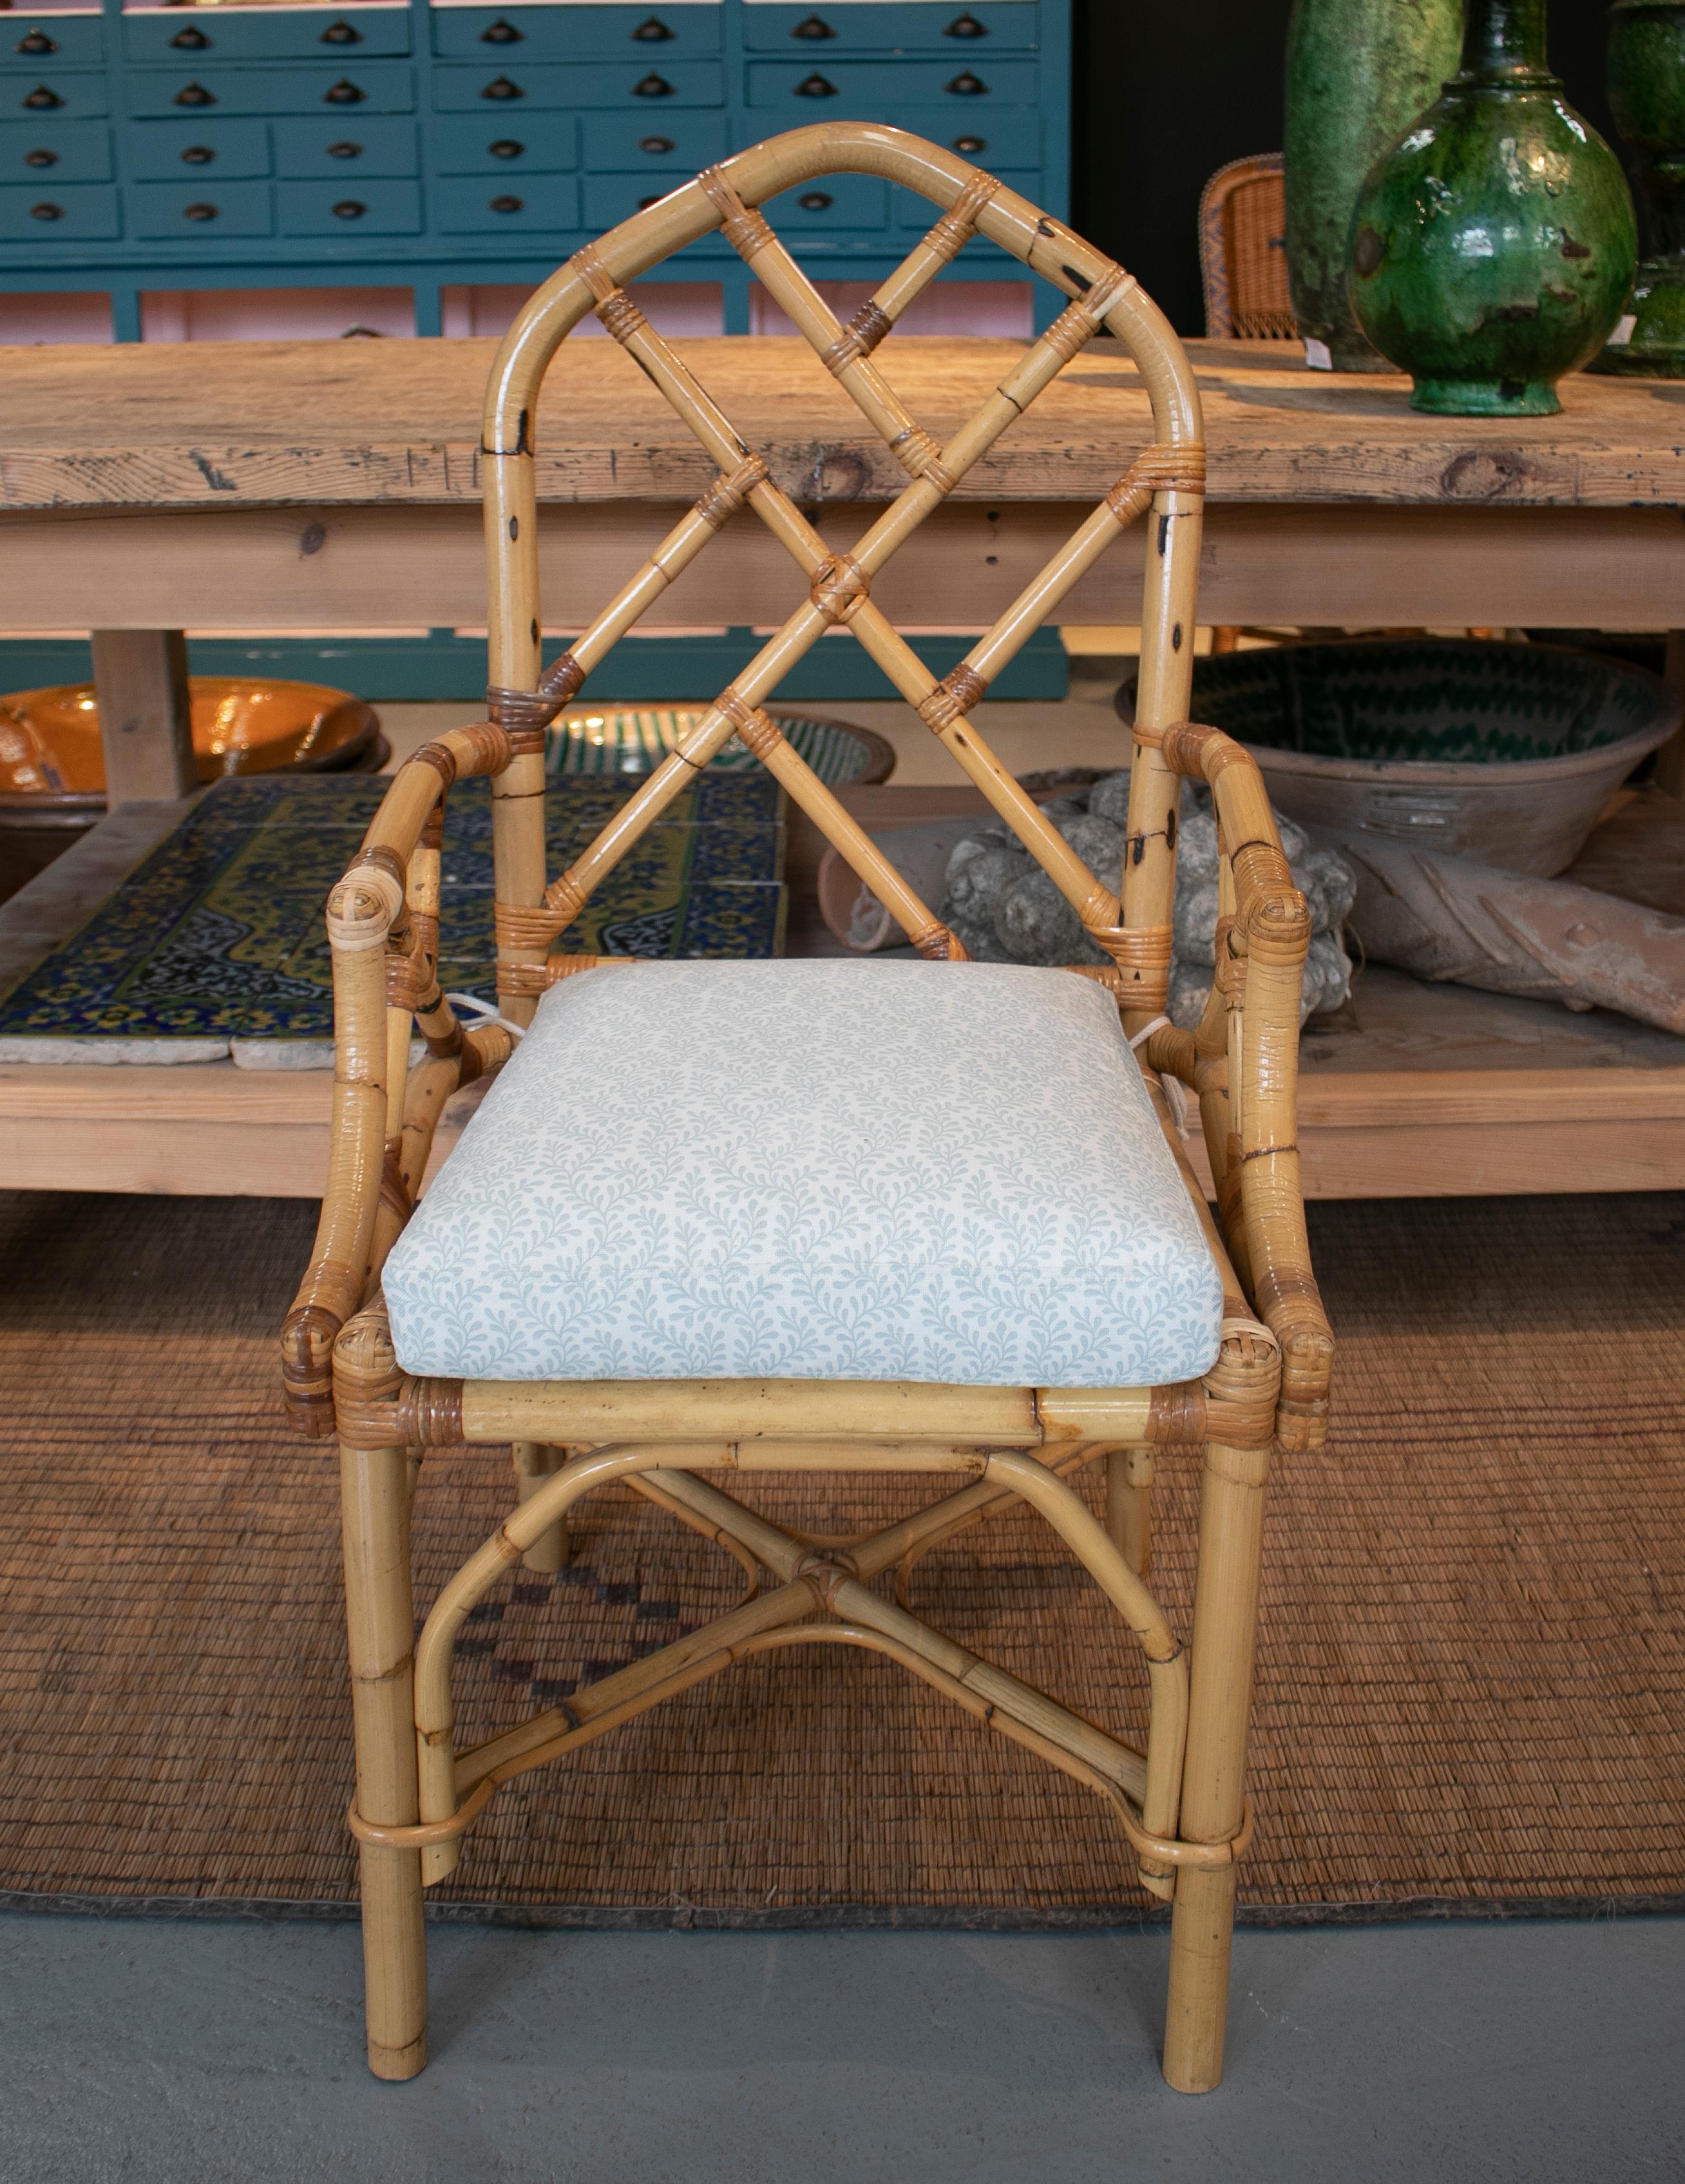 Vintage 1970s Spanish pair of bamboo chairs with white seat cushions.